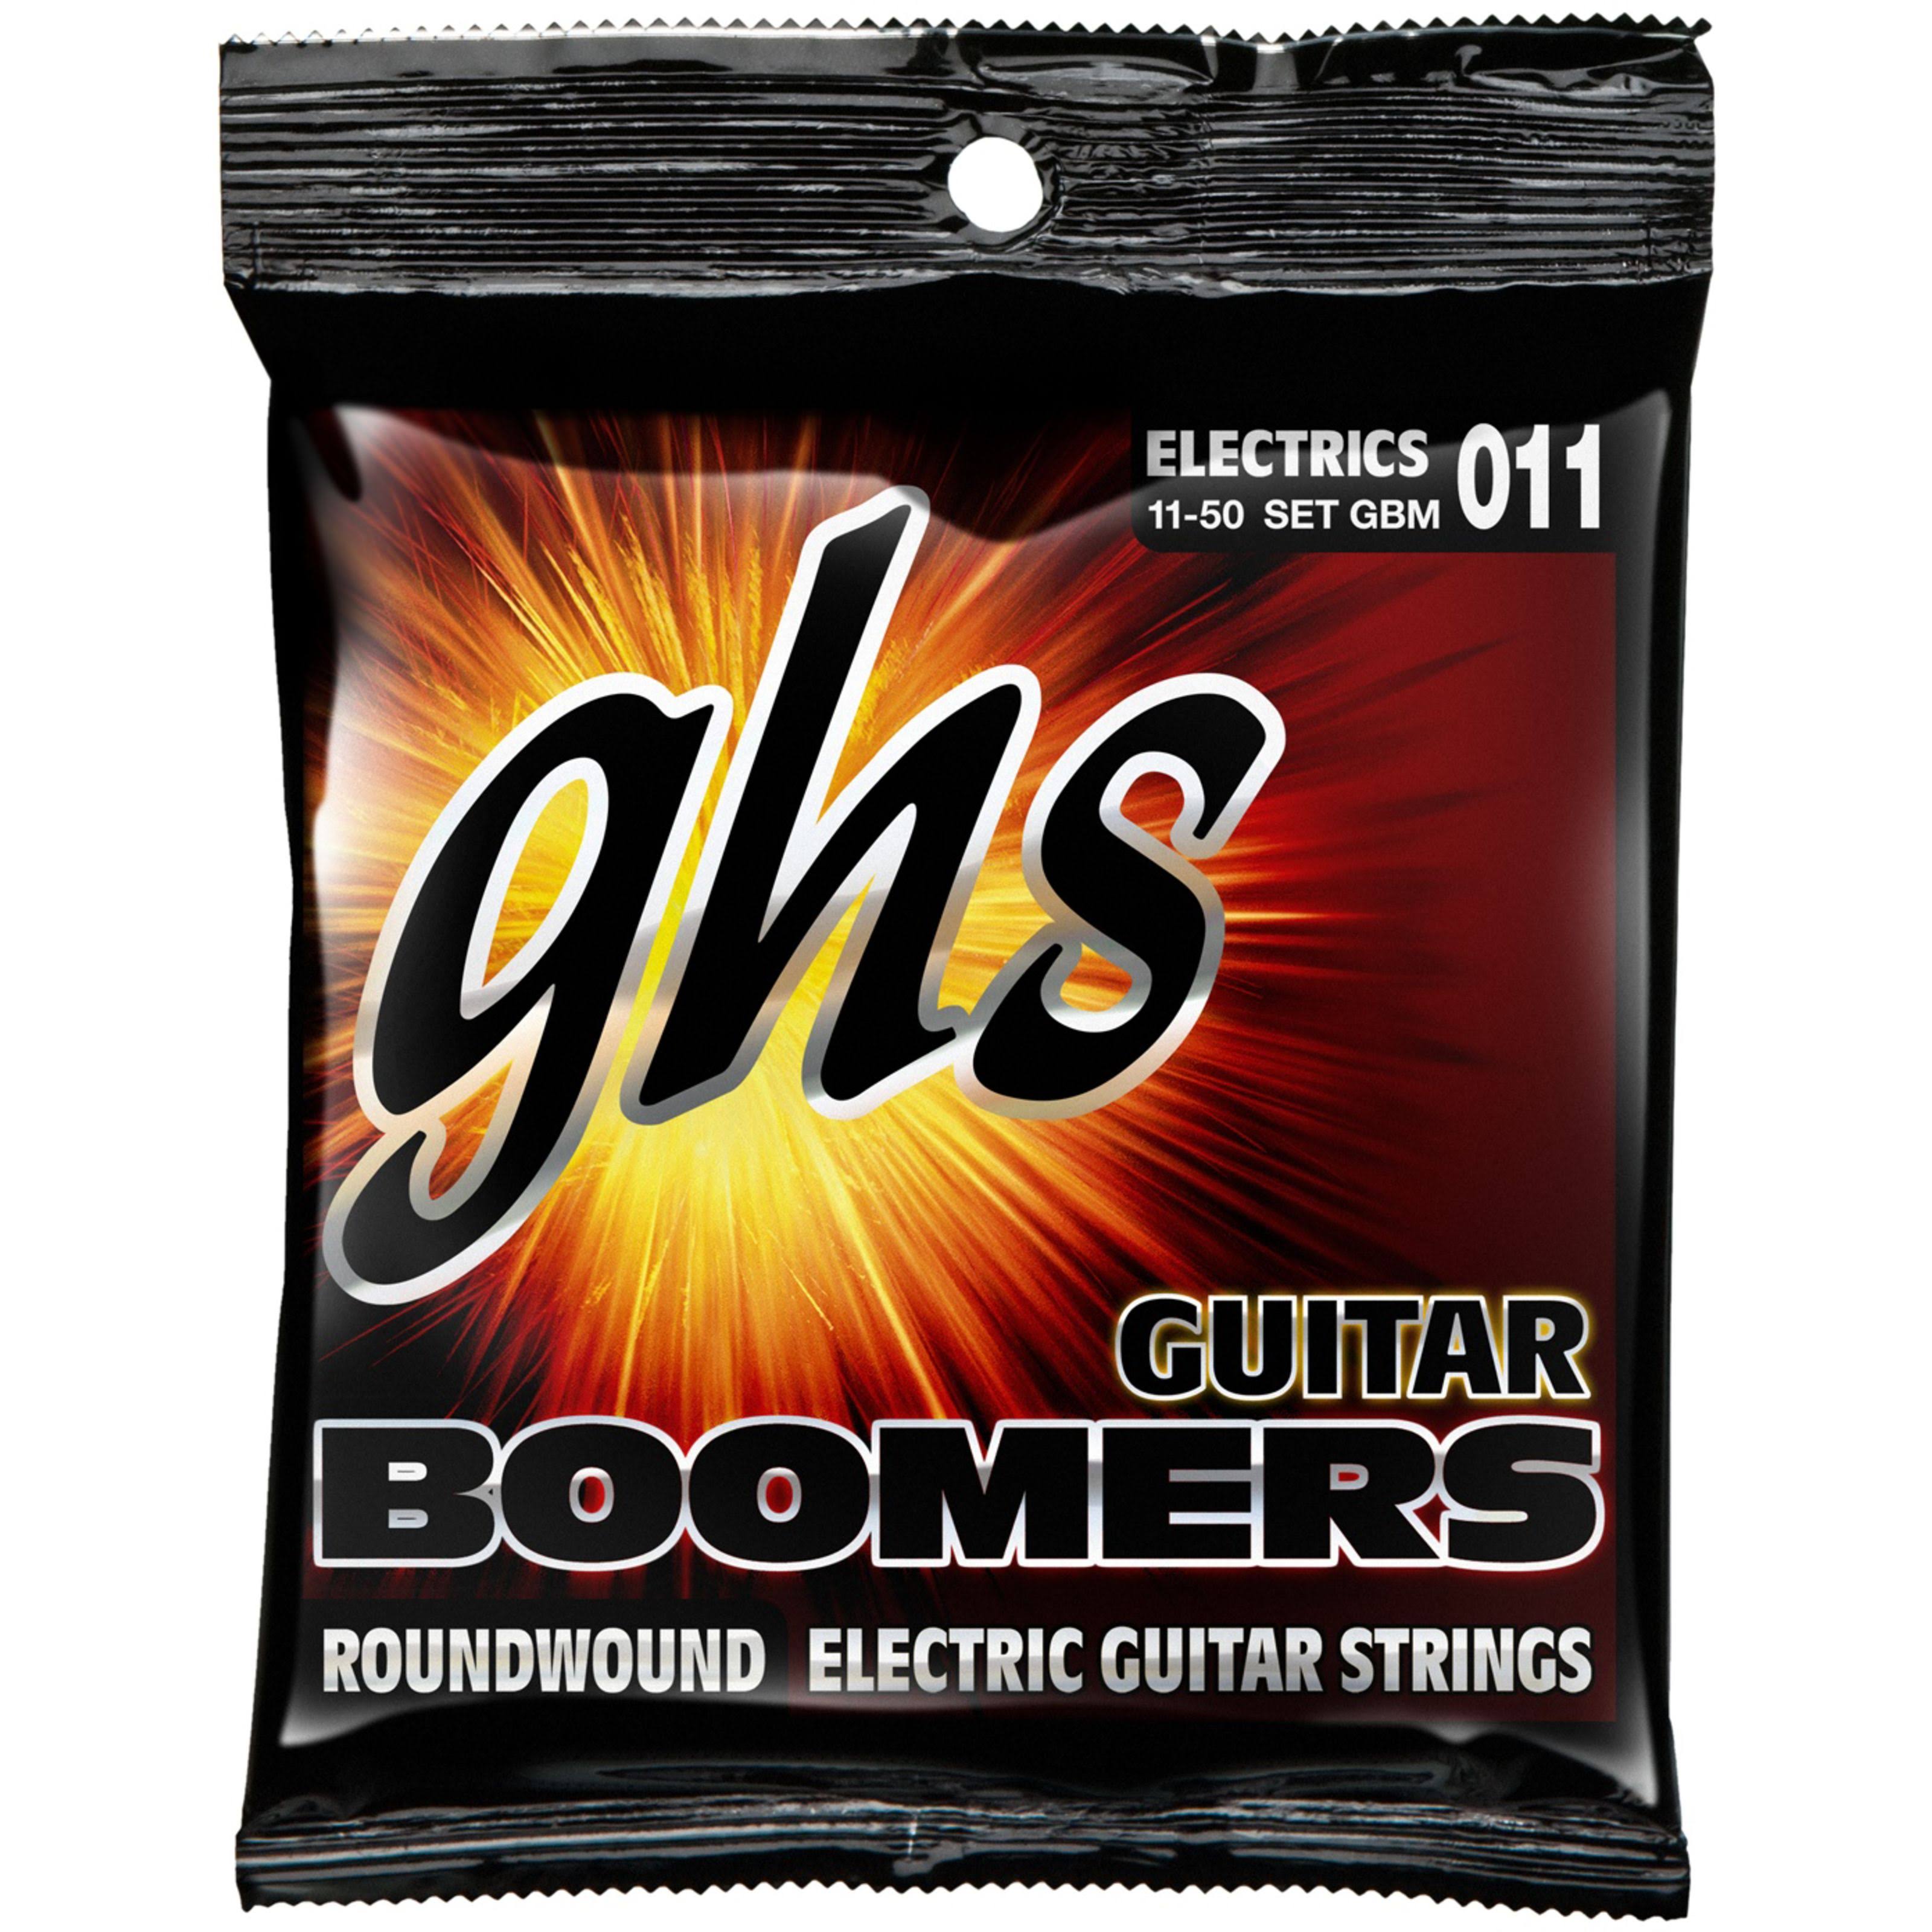 GHS Boomers Electric Guitar Strings - 011